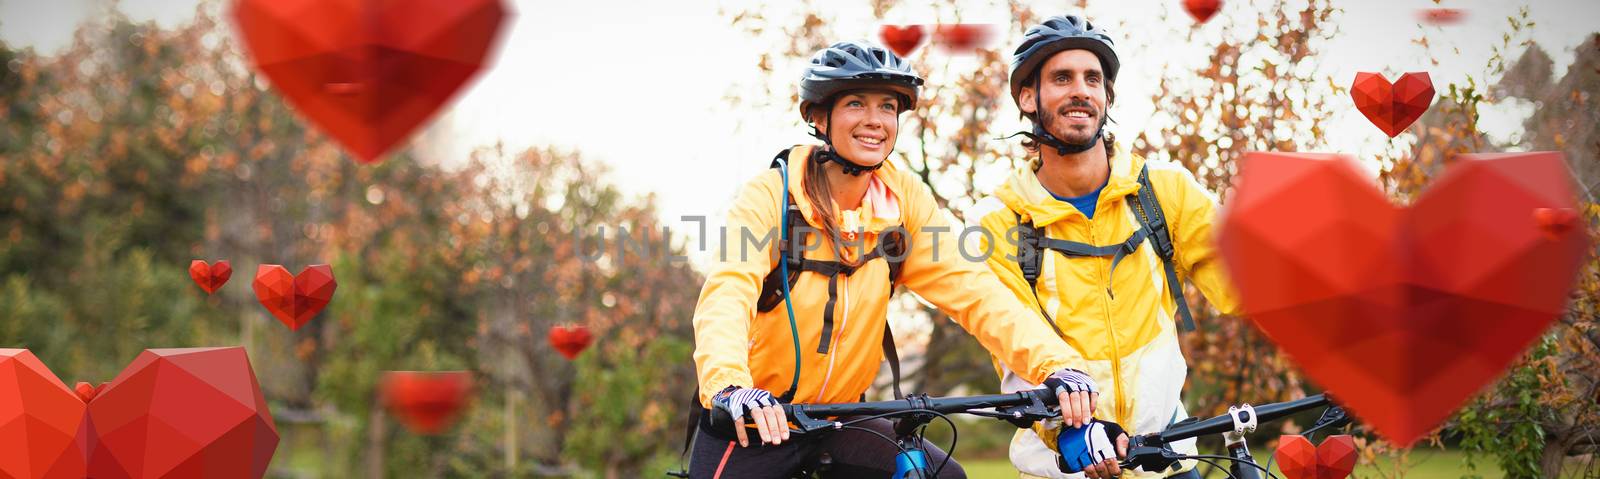 Red heart with white blackground against biker couple cycling in countryside